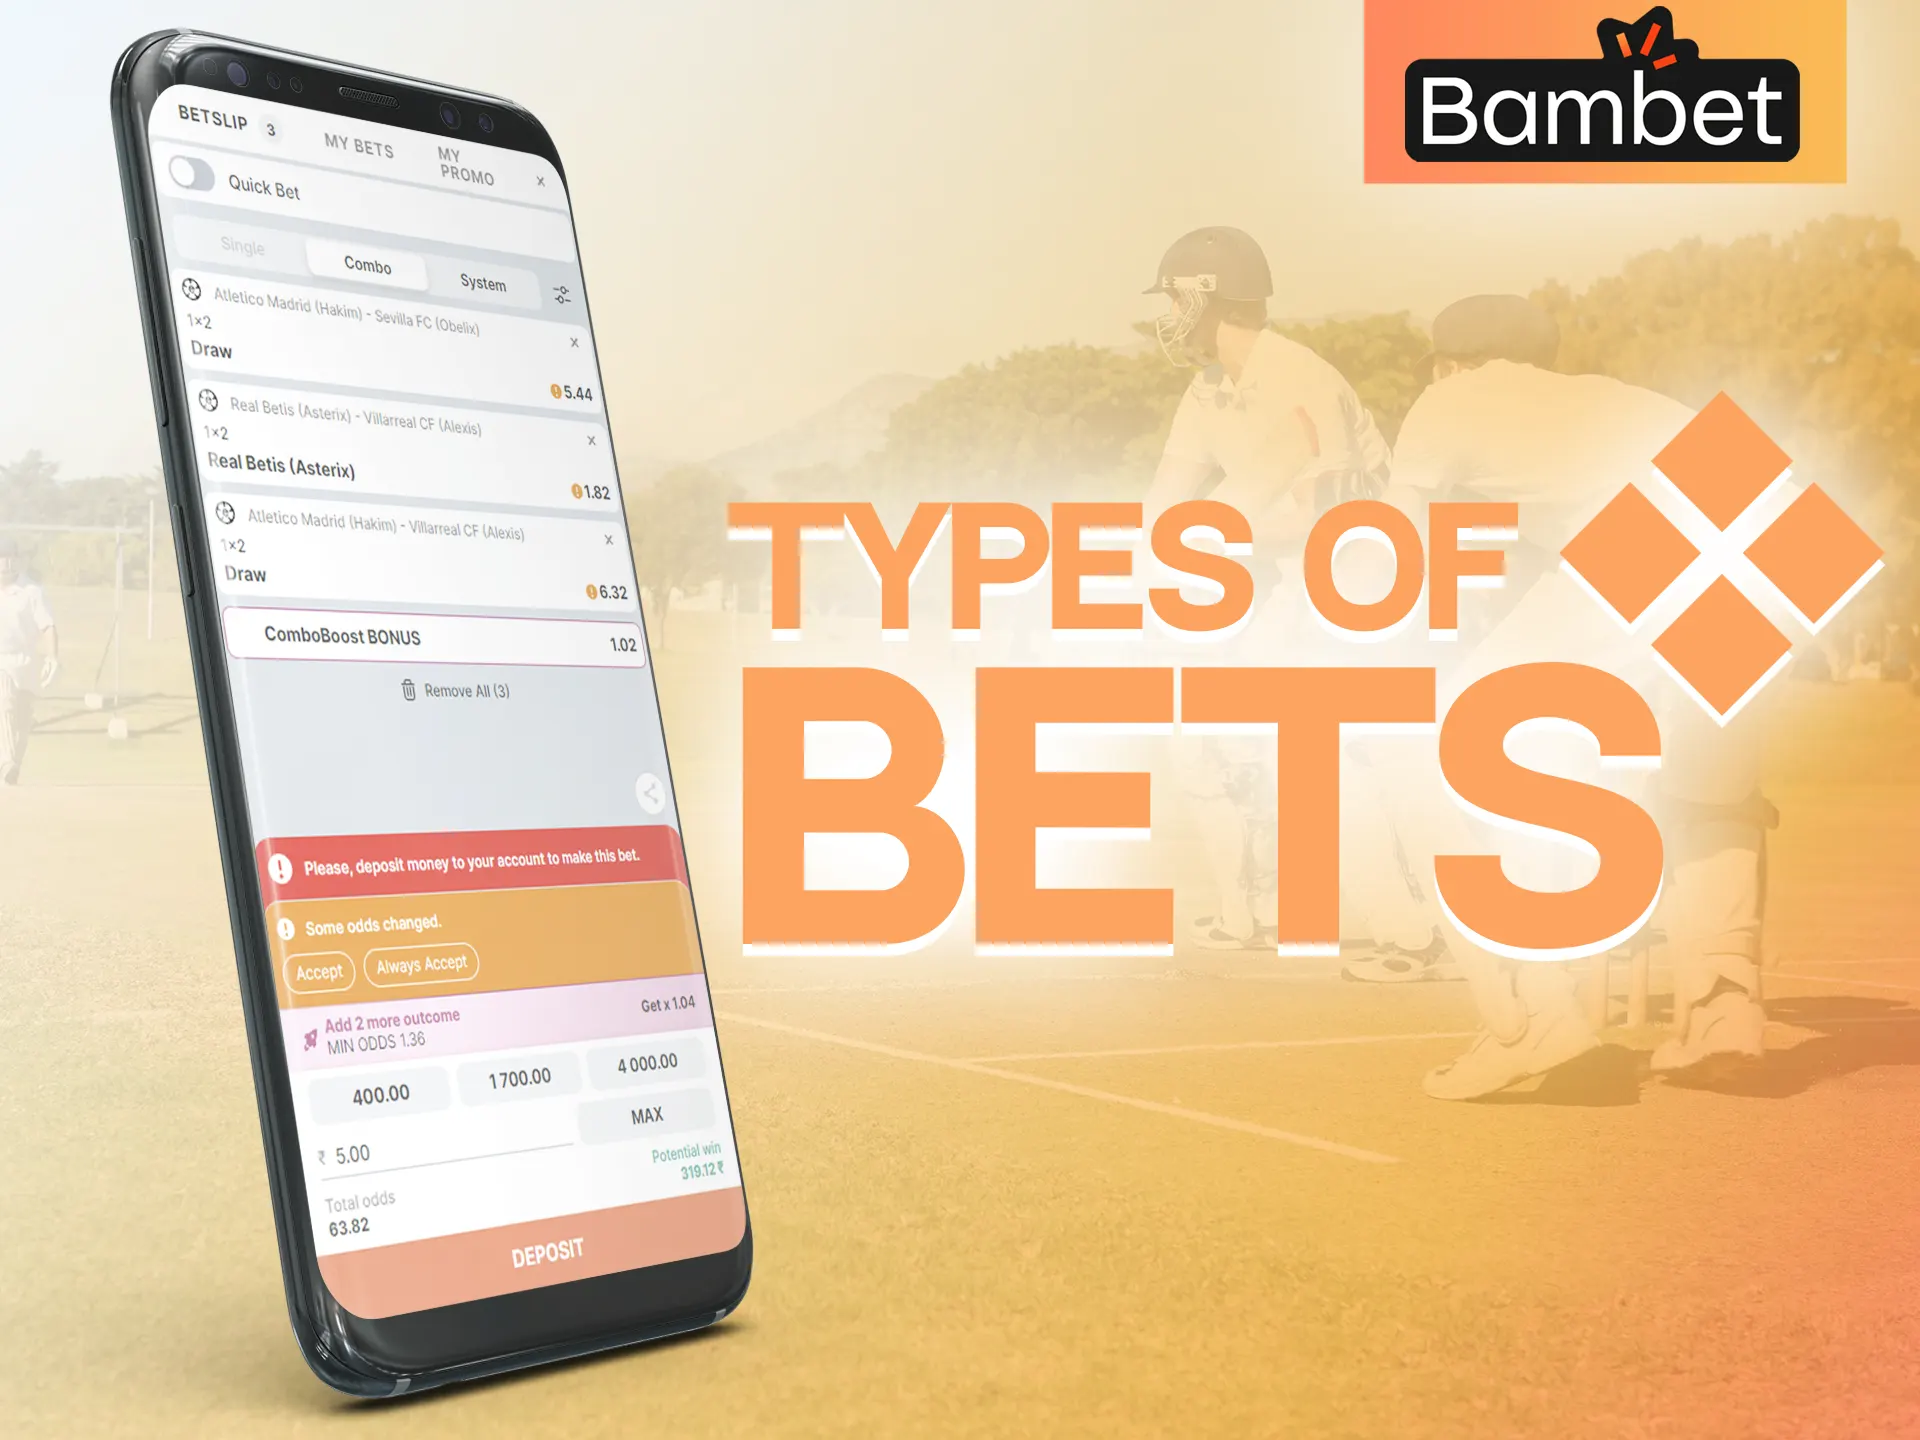 Different types of bets are available to you in the Bambet app.